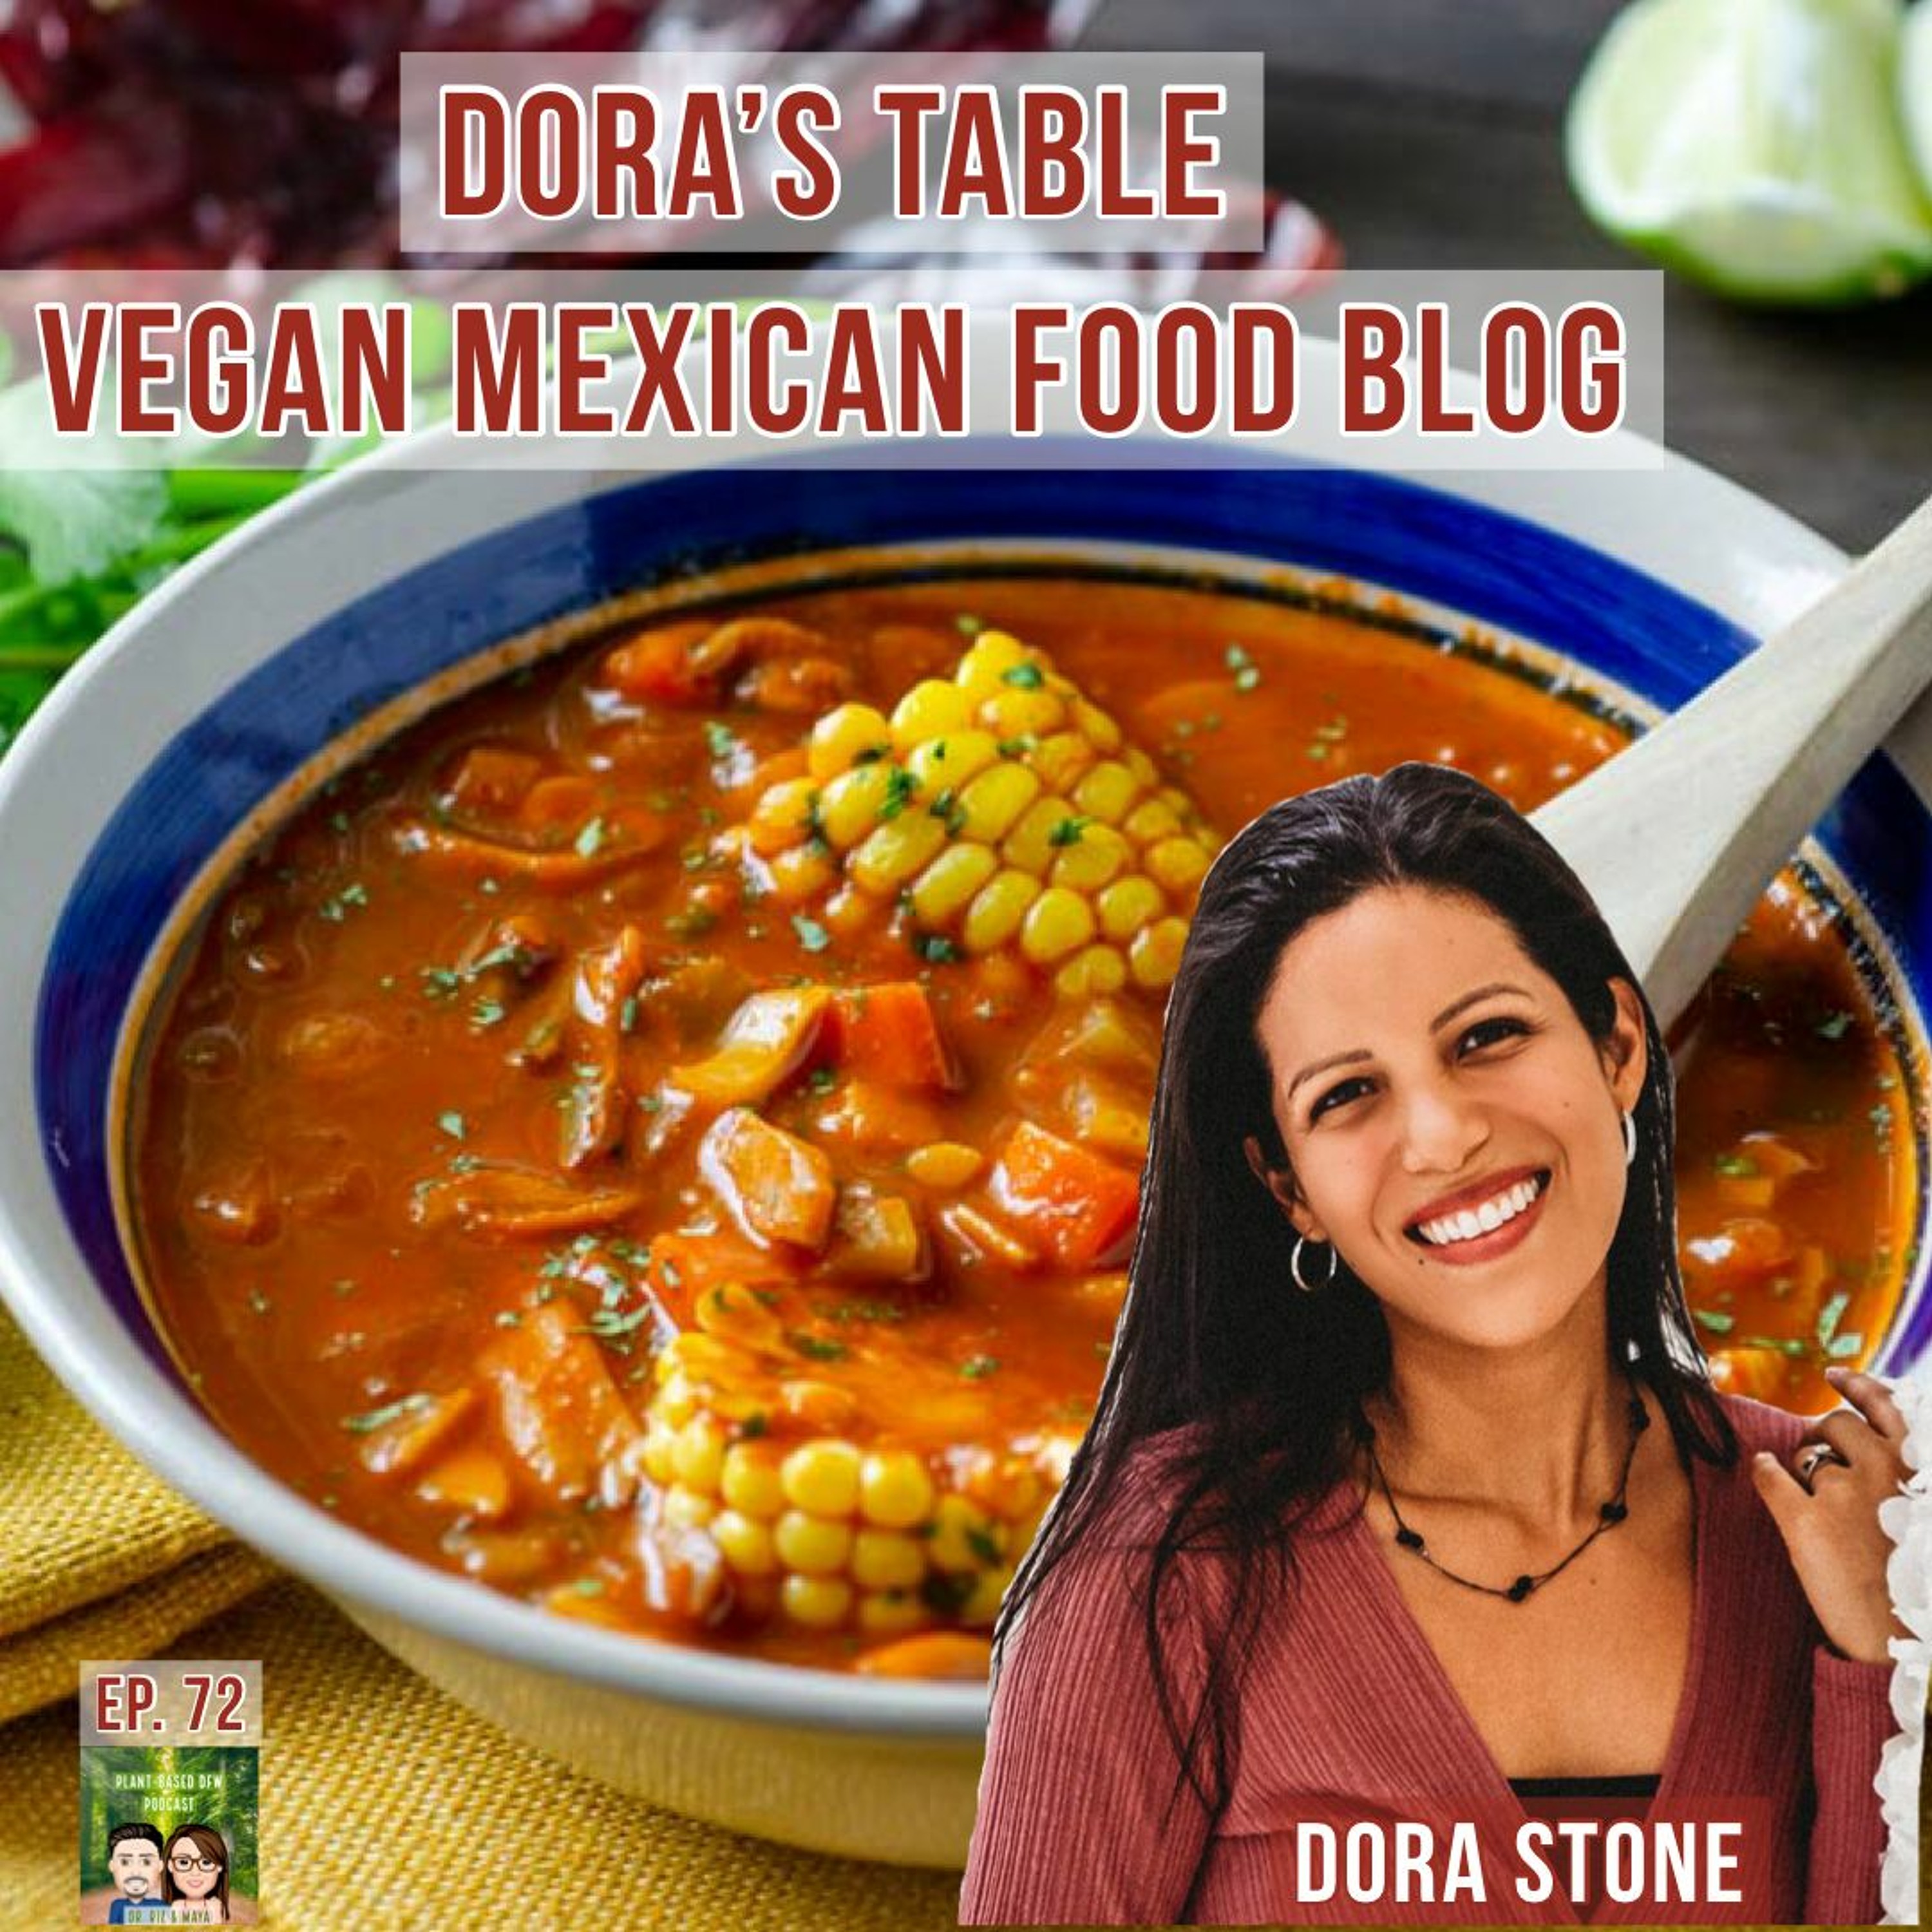 72: The Best Vegan Mexican Food with Dora Stone | Dora's Table Image